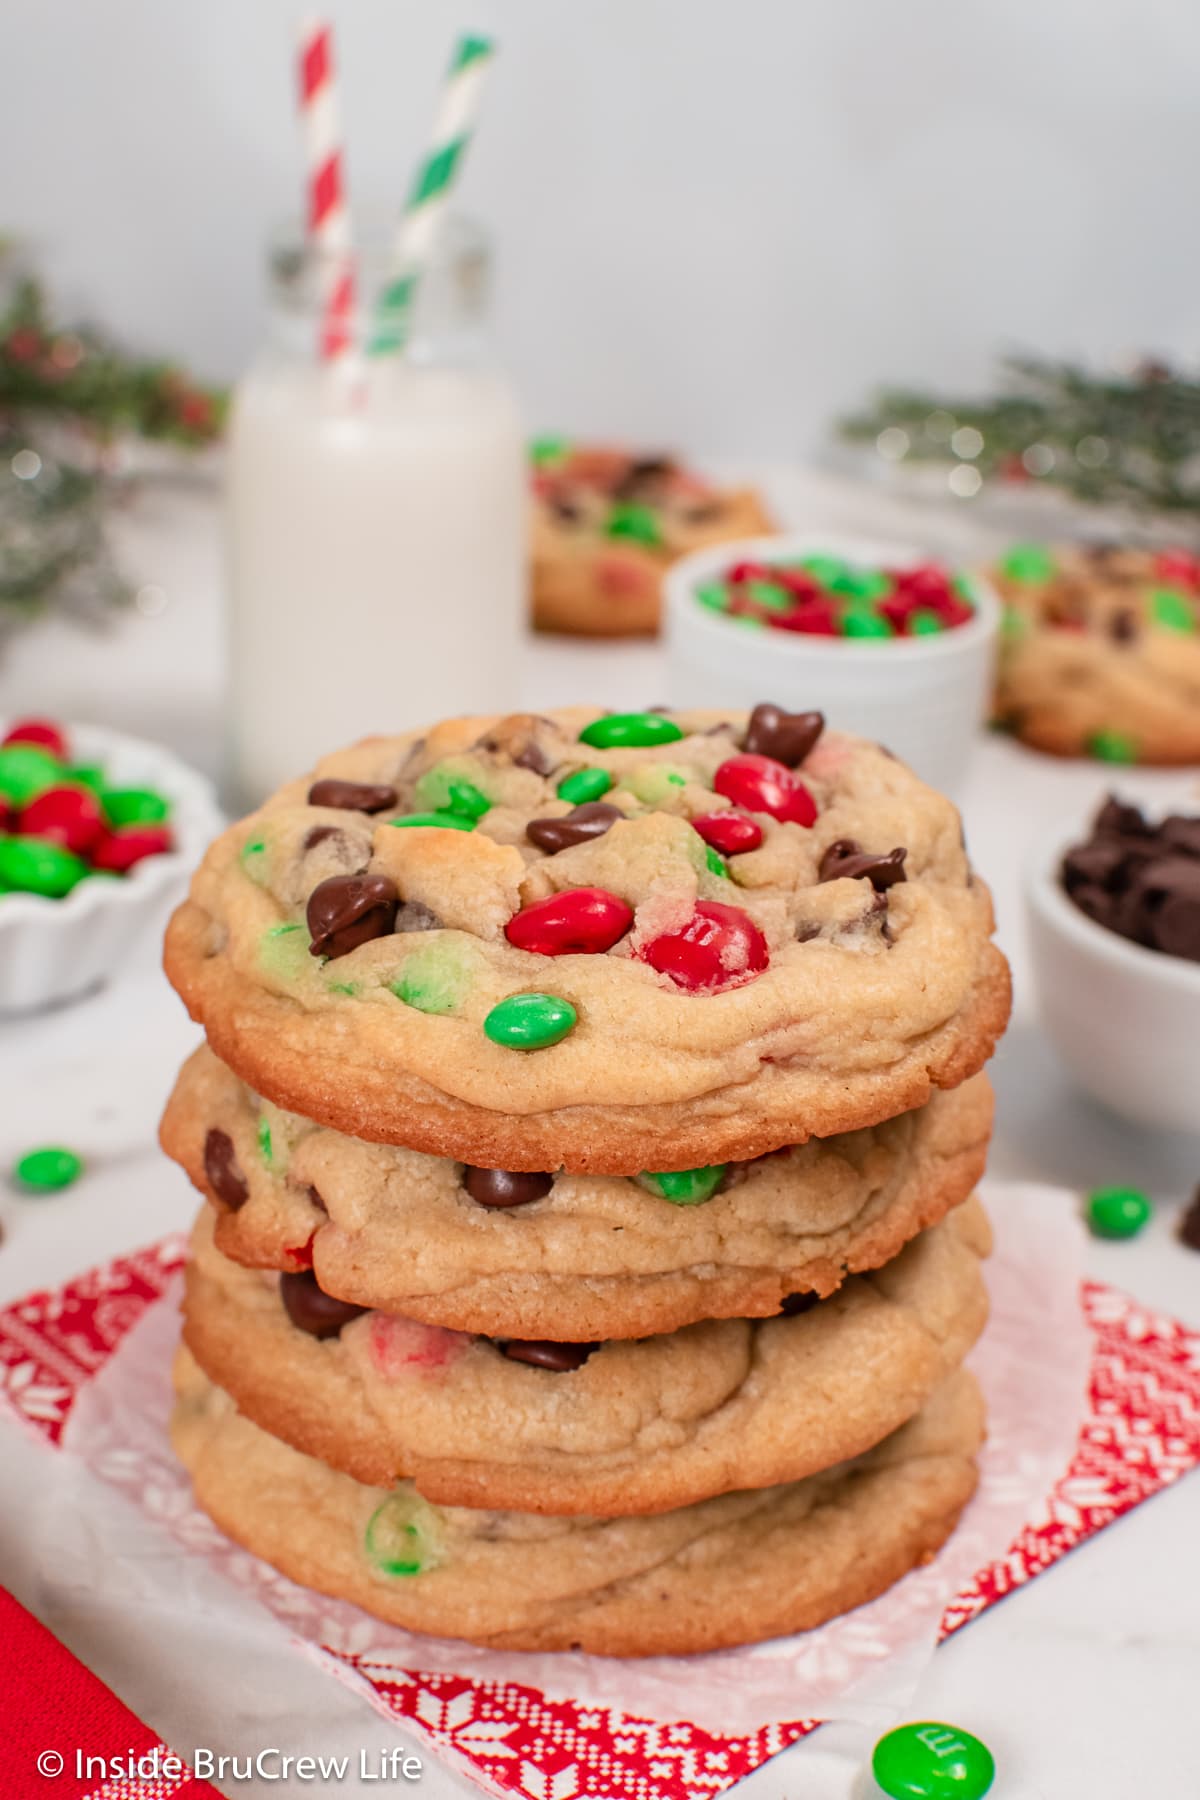 A stack of cookies with red and green candies in them.